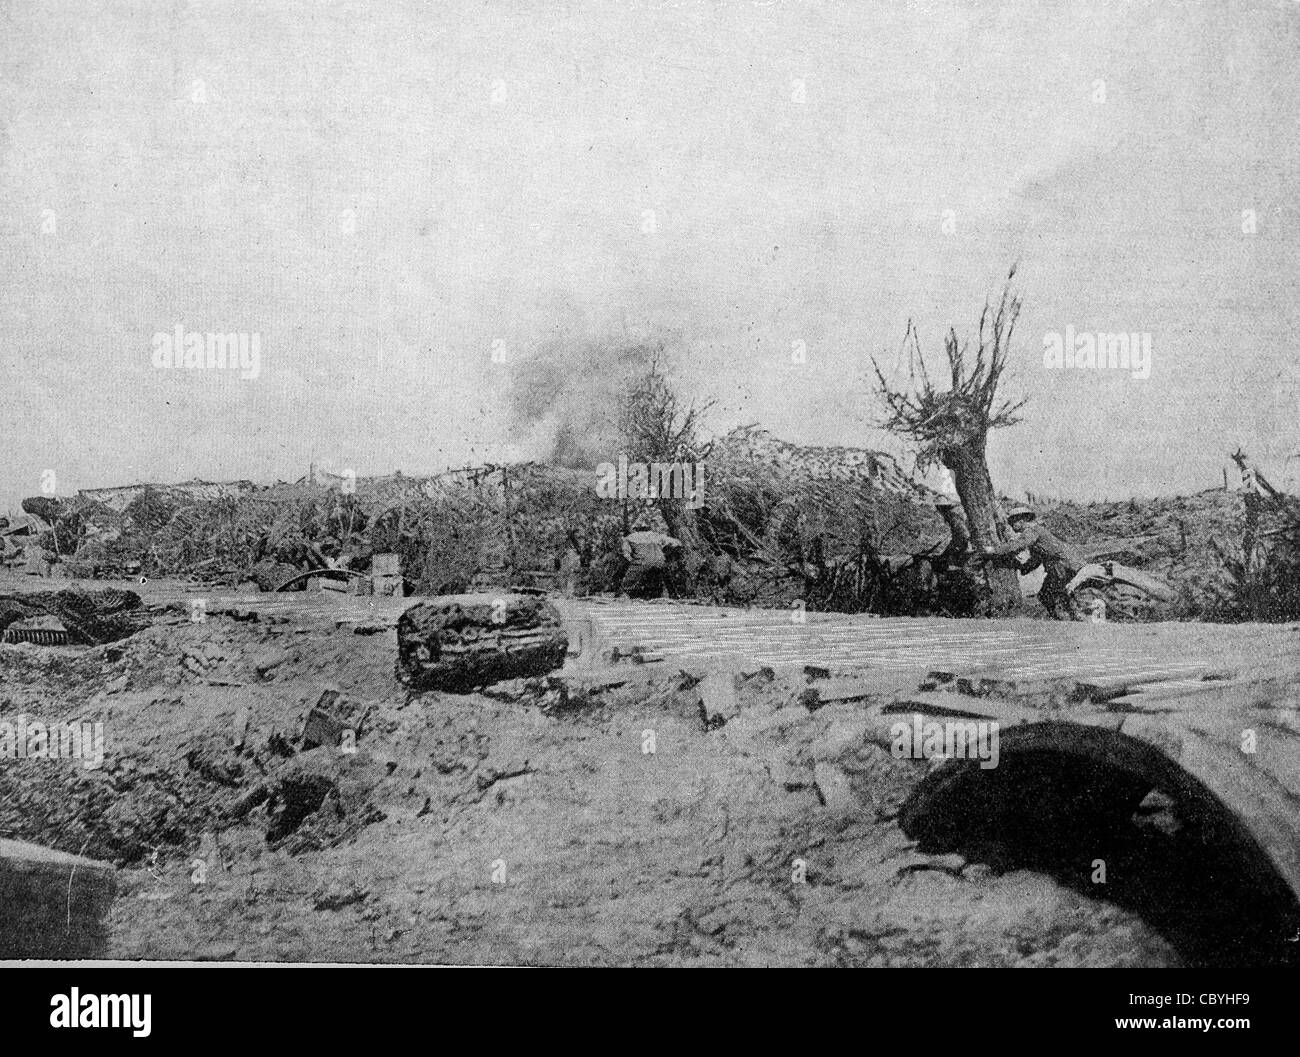 Gunners dodging flying bits of shell - A near thing on a battery position - Flanders front - World War I Stock Photo